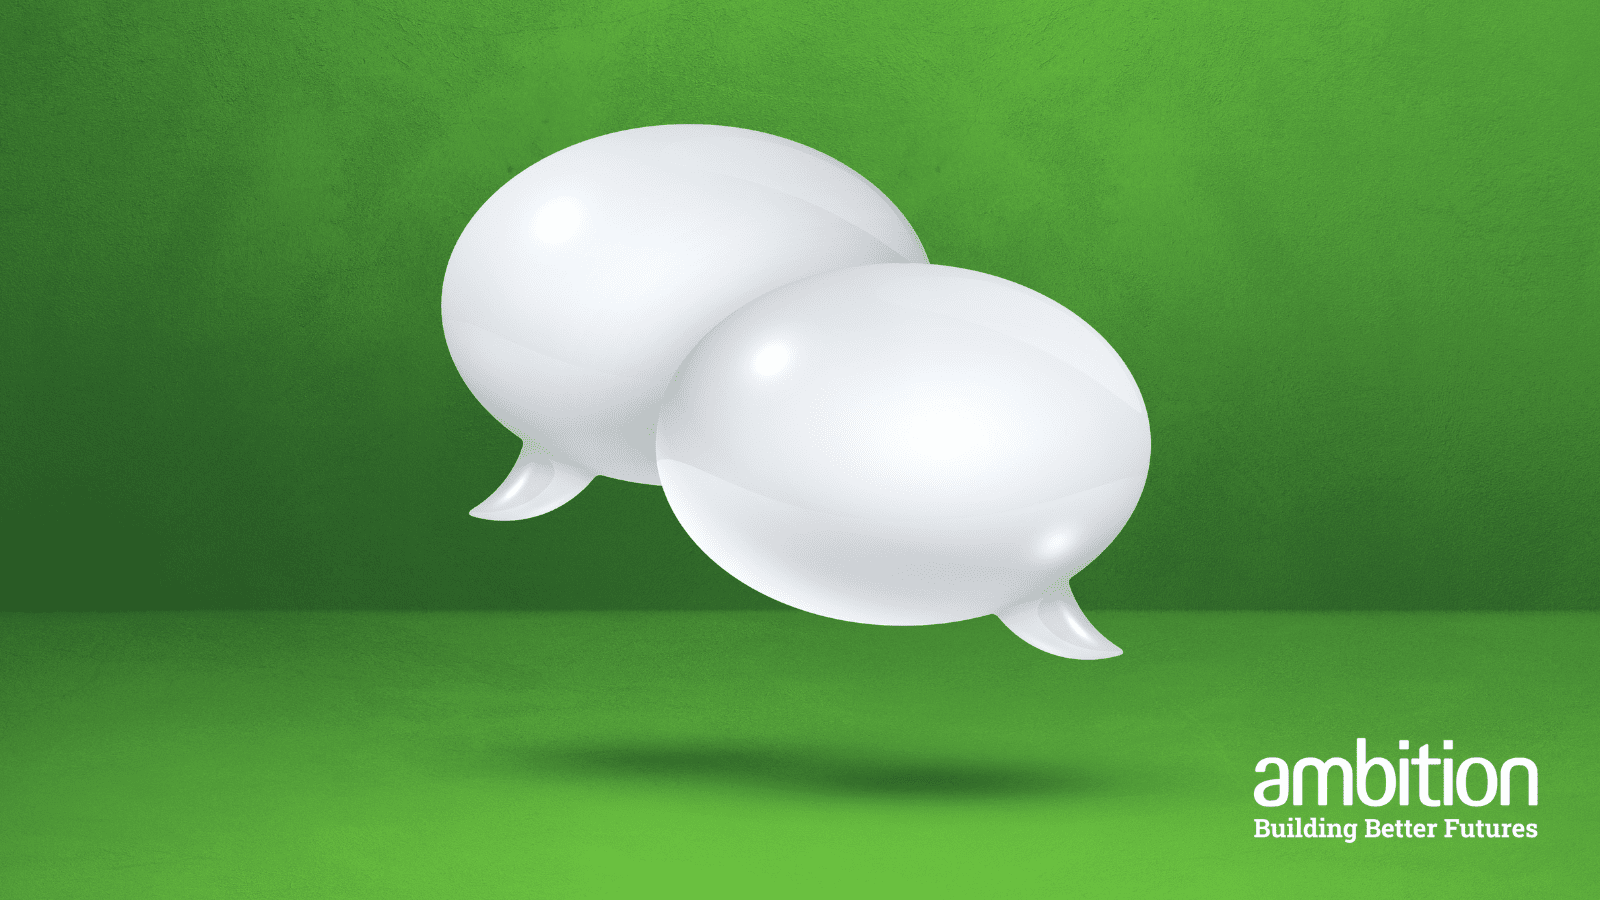 Two overlapping speech bubbles floating in mid air on a green background.